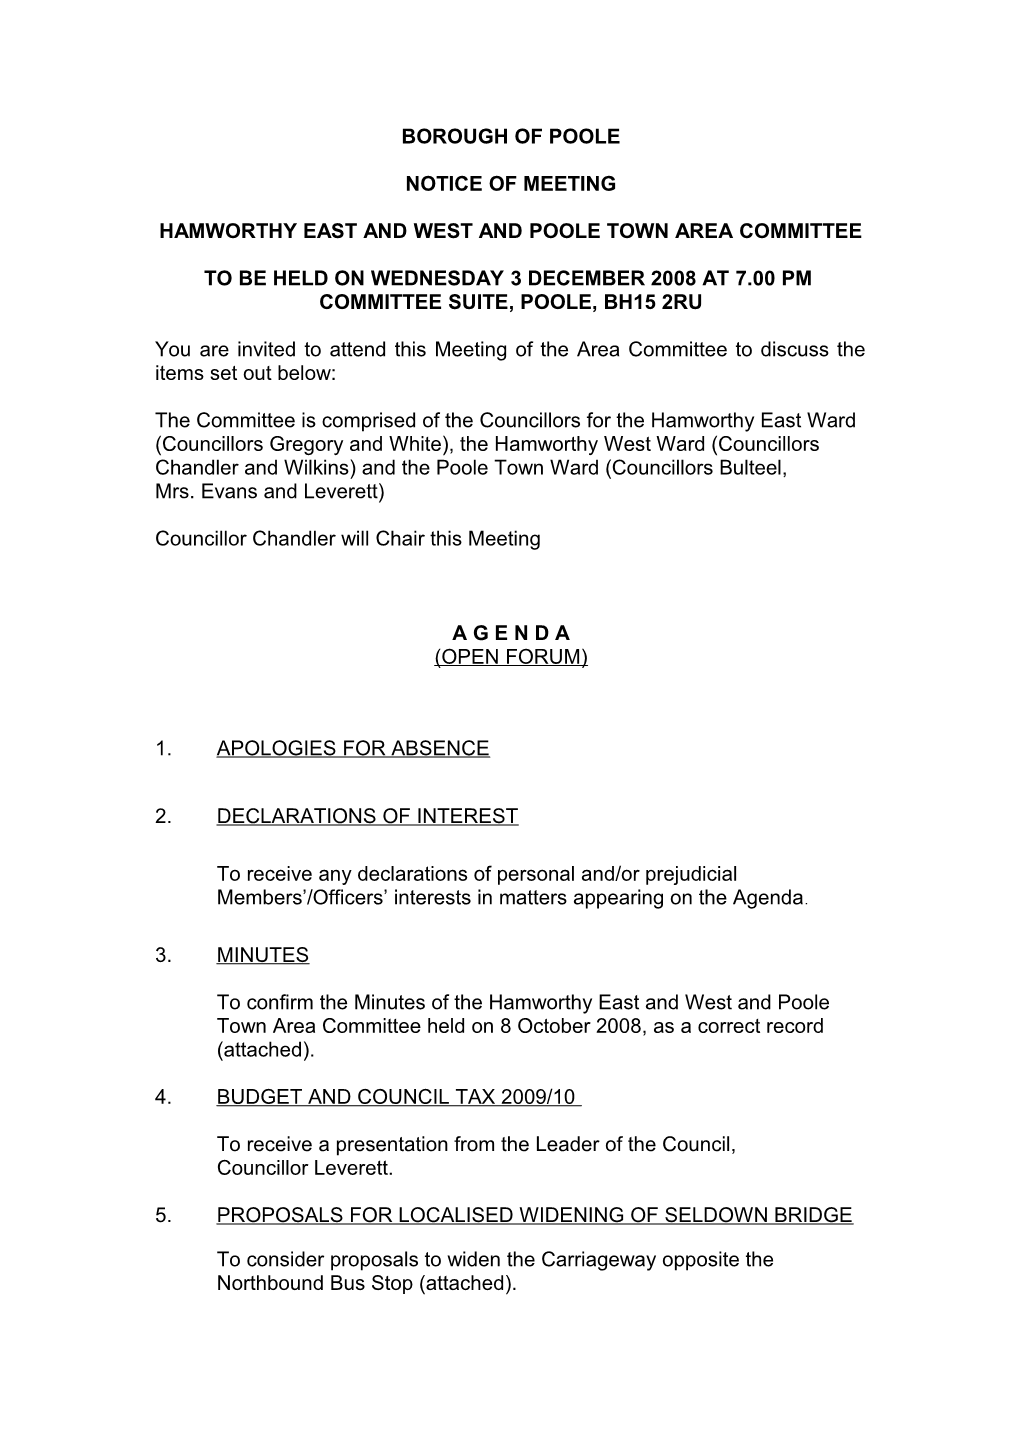 Agenda - Hamworthy East and West and Poole Town Area Committee - 3 December 2008